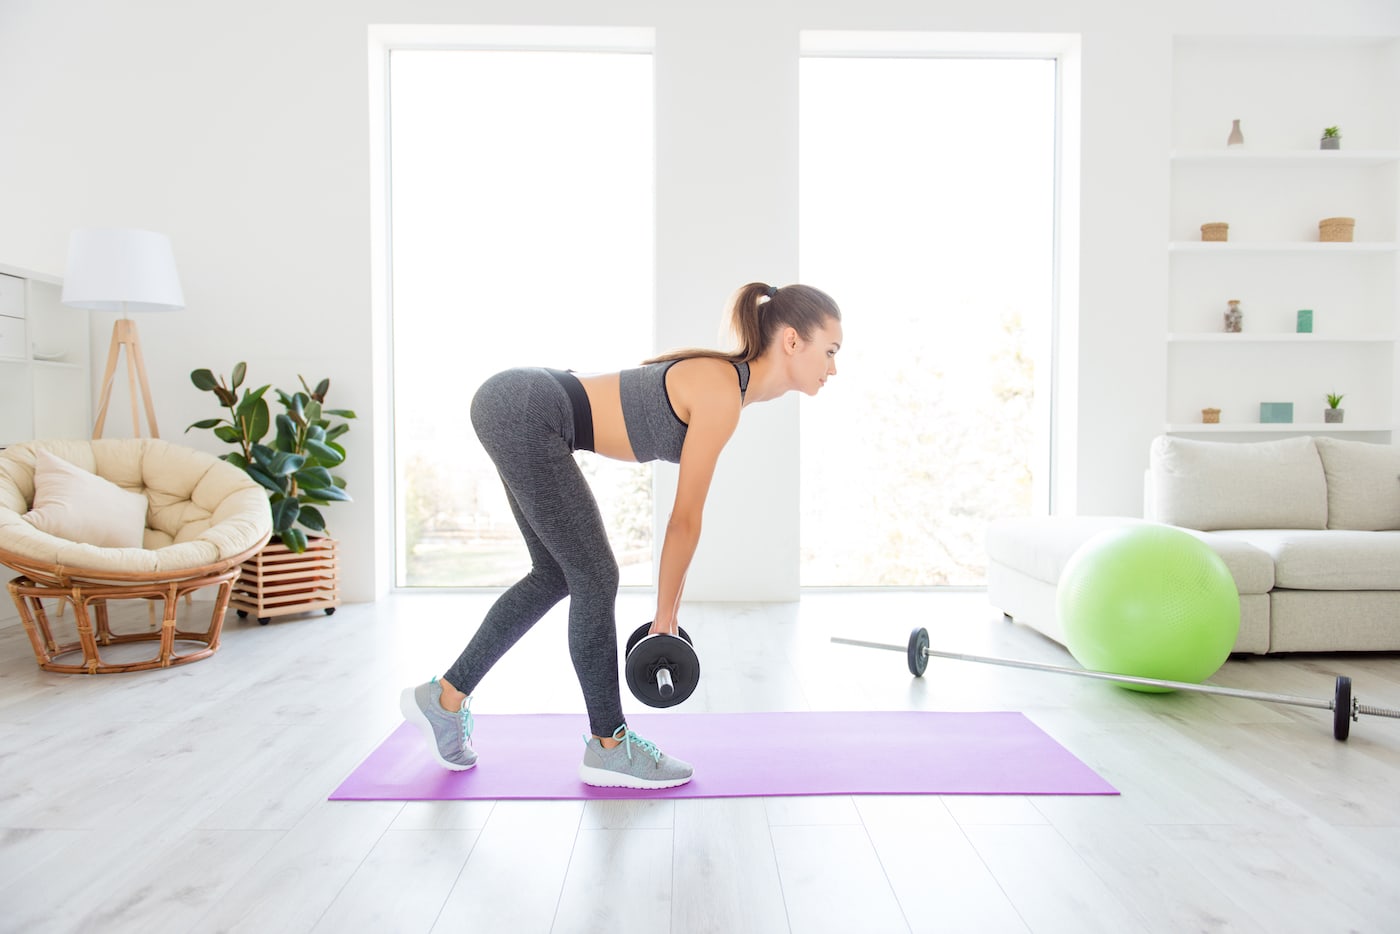 How to lift weights at home whether you're a fitness newb or a full-blown body builder